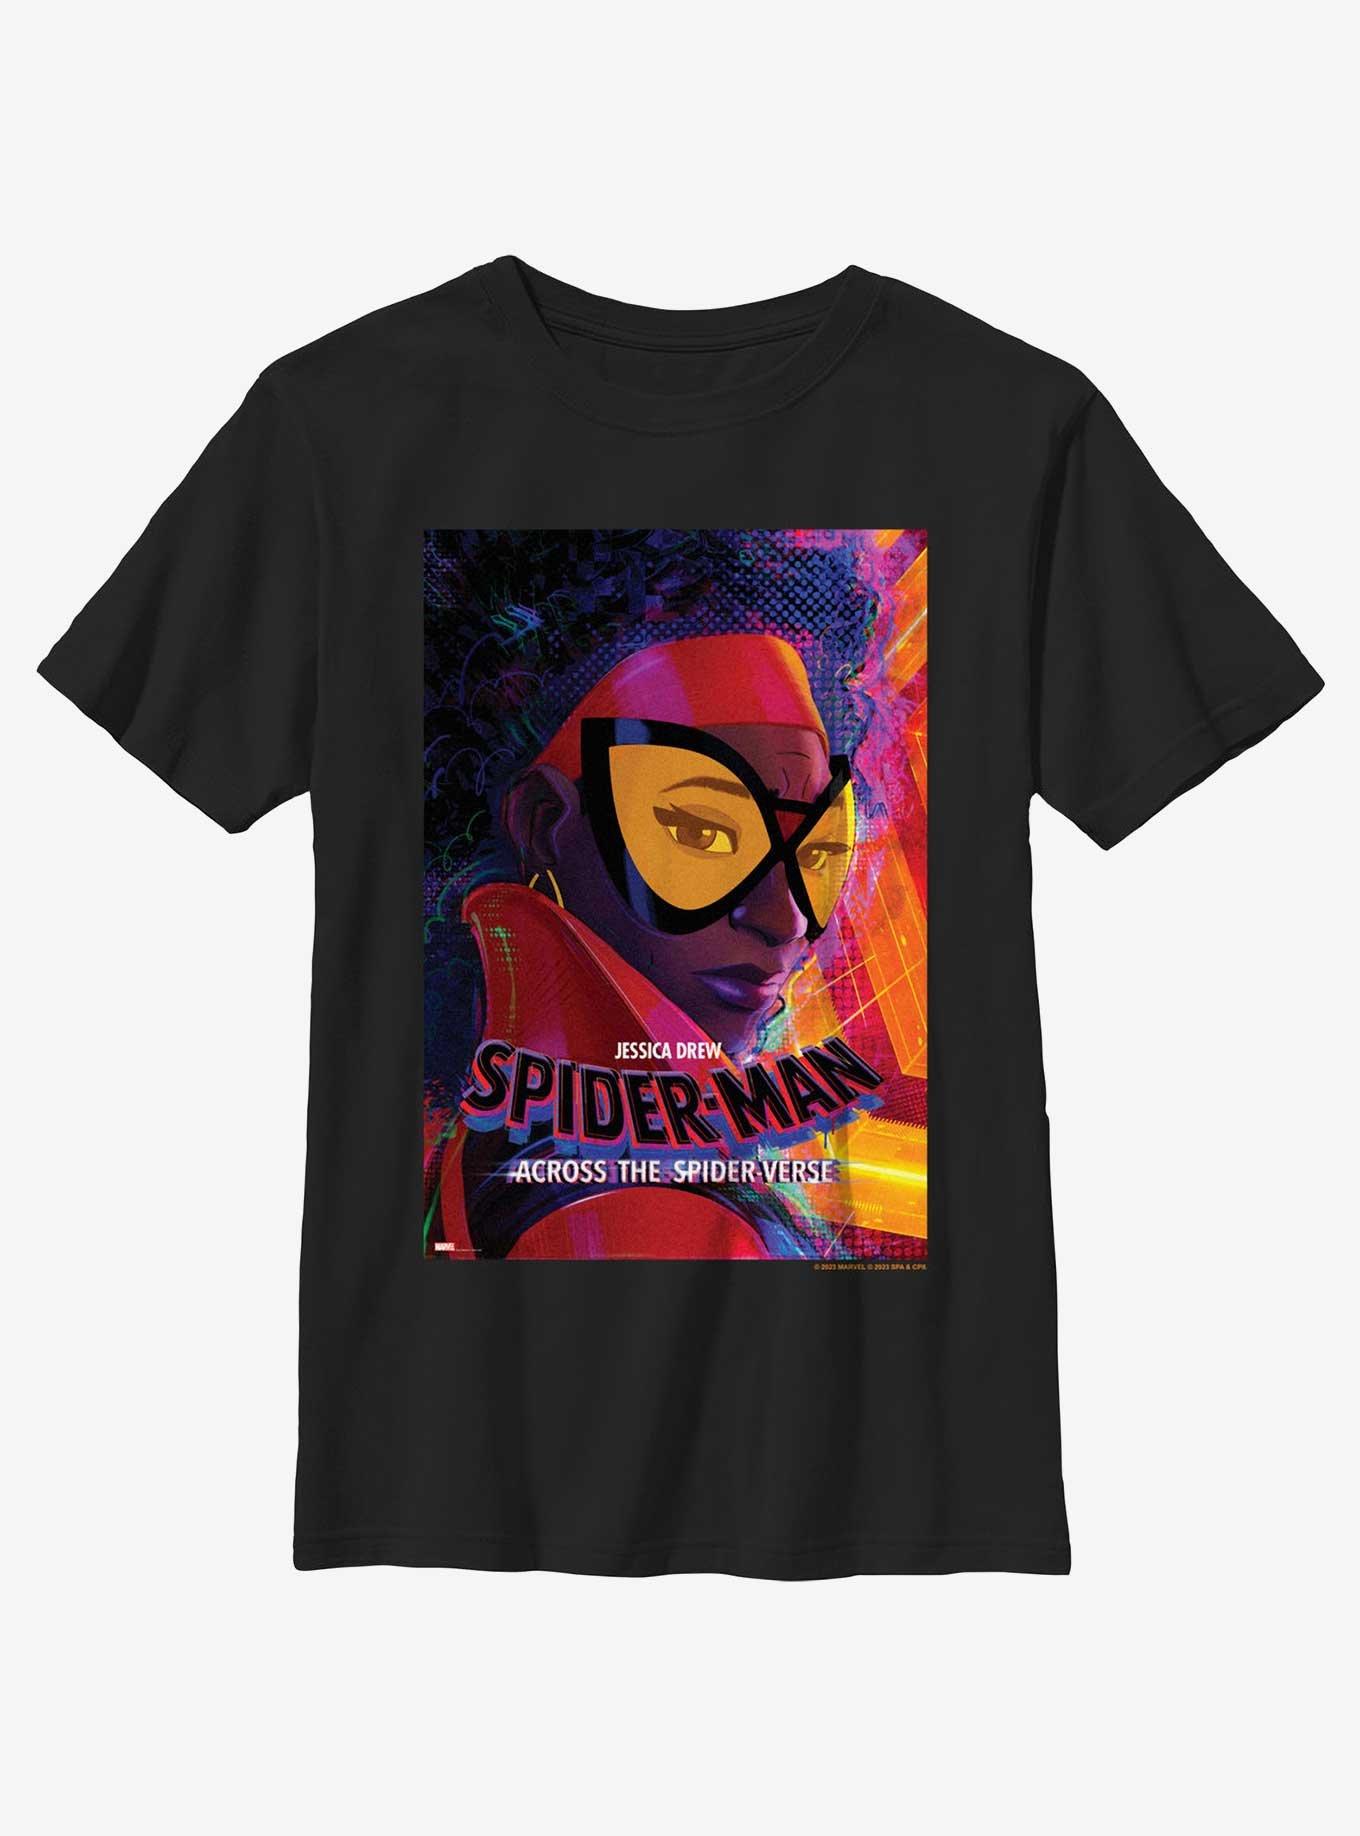 Spider-Man: Across The Spider-Verse Jessica Drew Spider-Woman Poster Youth T-Shirt, BLACK, hi-res